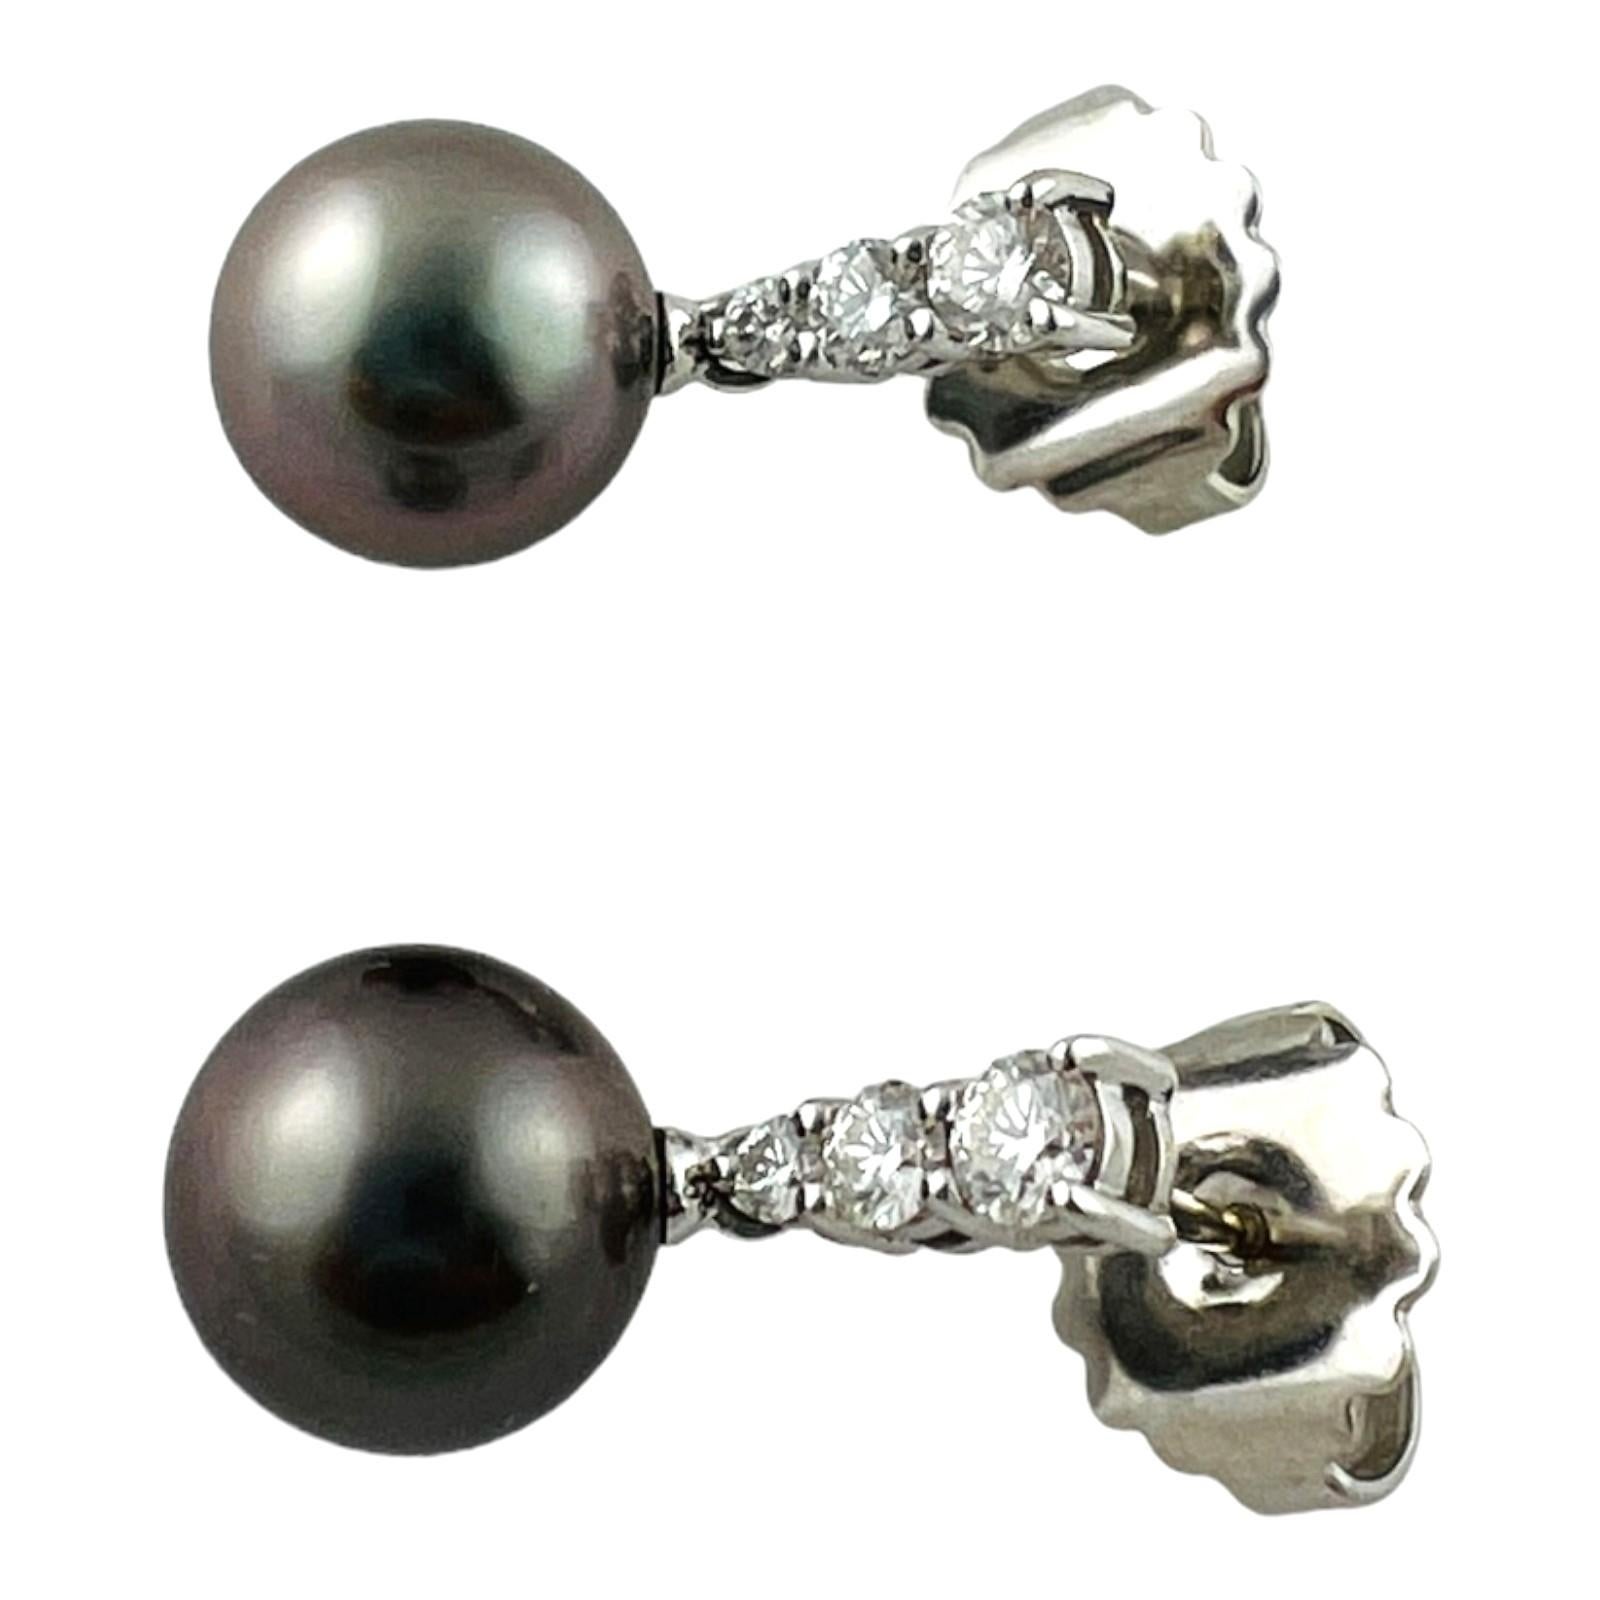 Mikimoto Morning Dew Black South Sea Cultured Pearl Earrings

These beautiful Mikimoto pearl and diamond earrings are set in 18K white gold.

Black south sea cultured pearls are approx. 9mm

6 round brilliant diamonds approx. .48cts and of VS